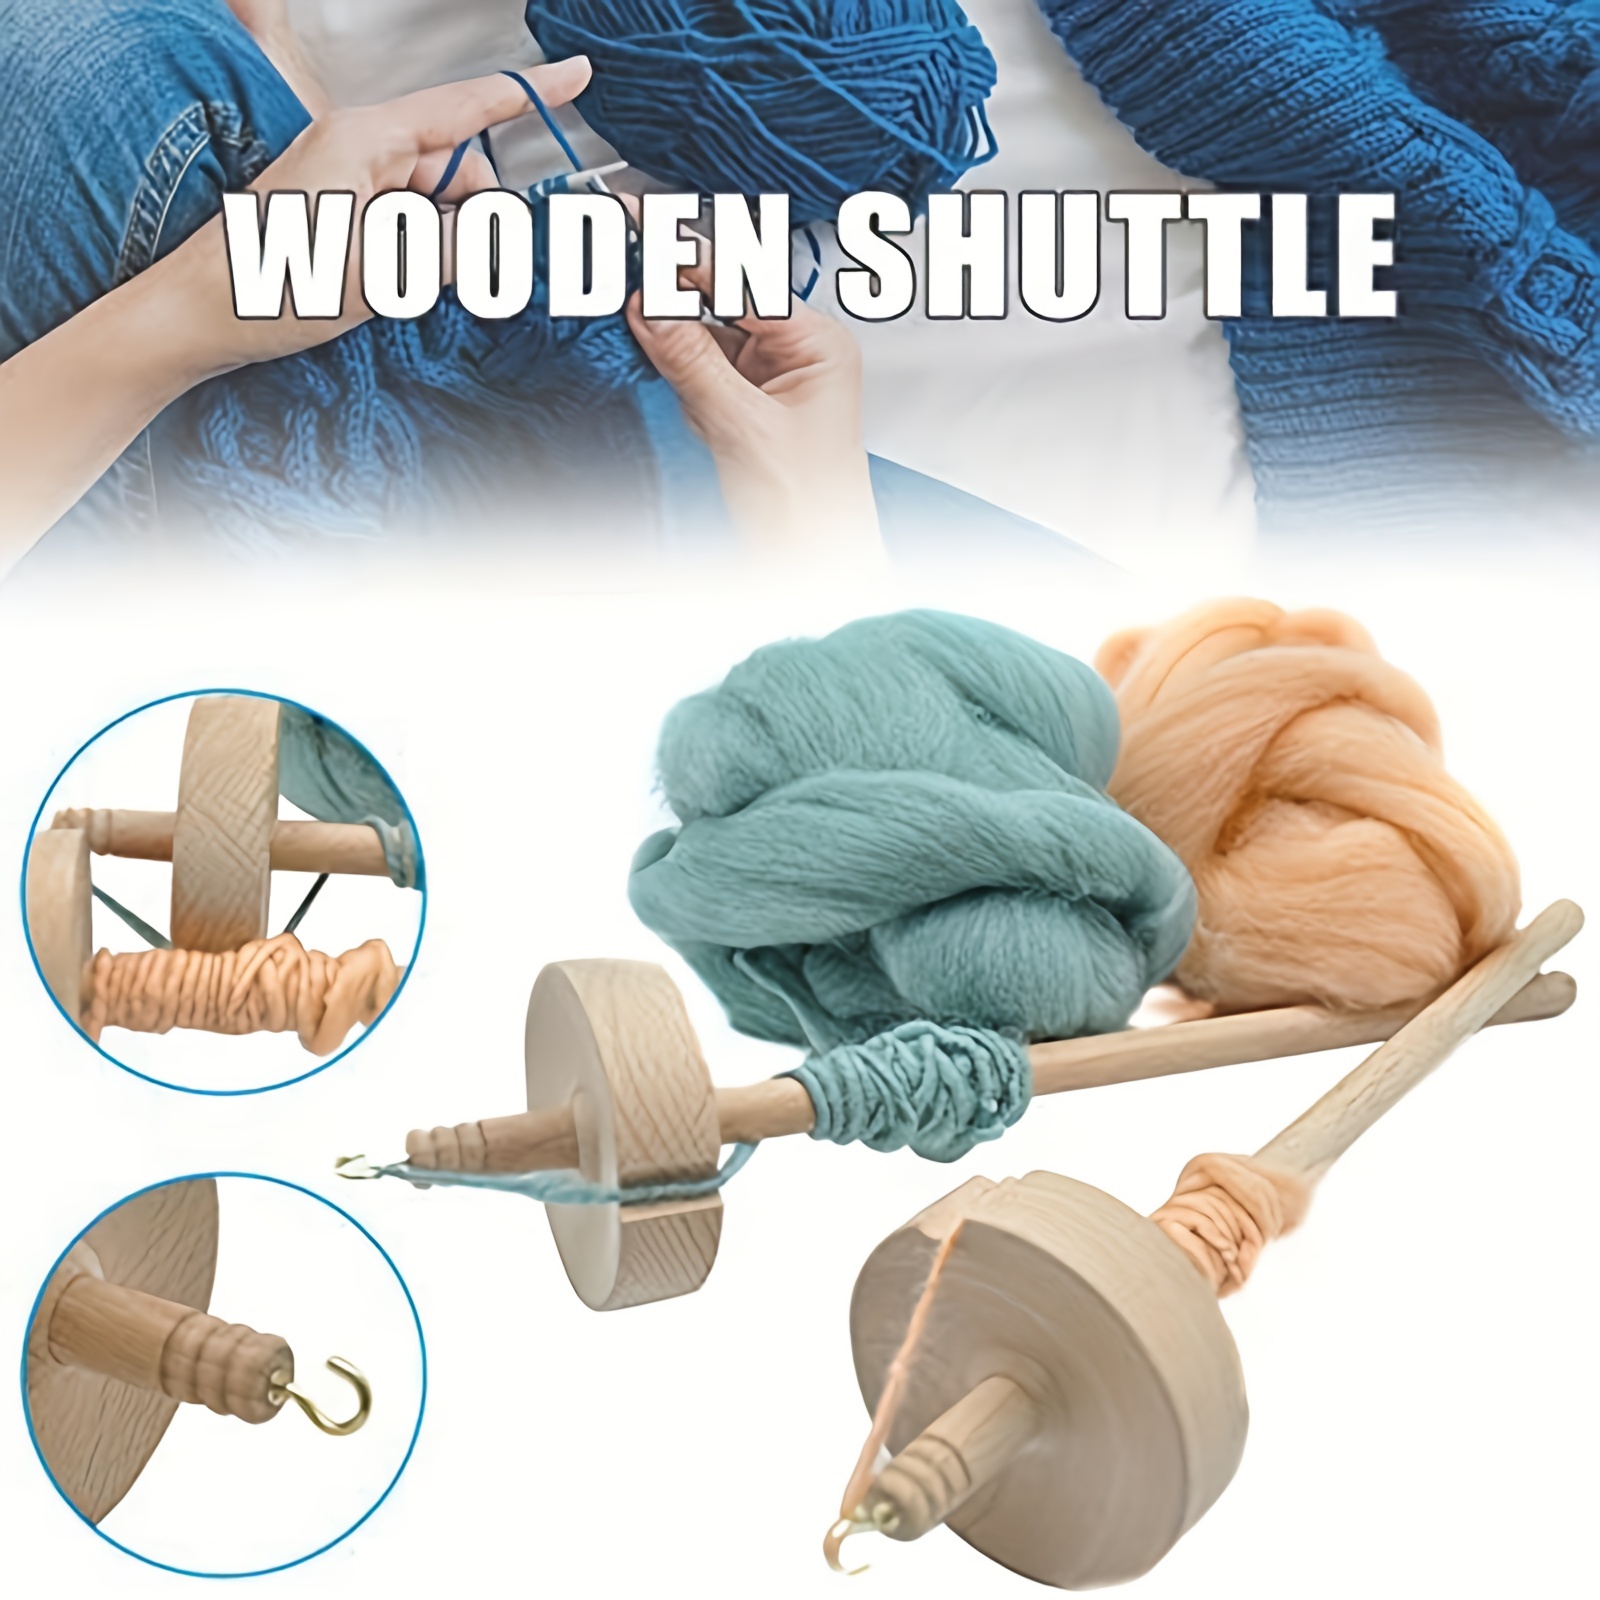 Large Wooden Drop Spindle for Hand Spinning Wool Yarn - Solid Wood Spindle